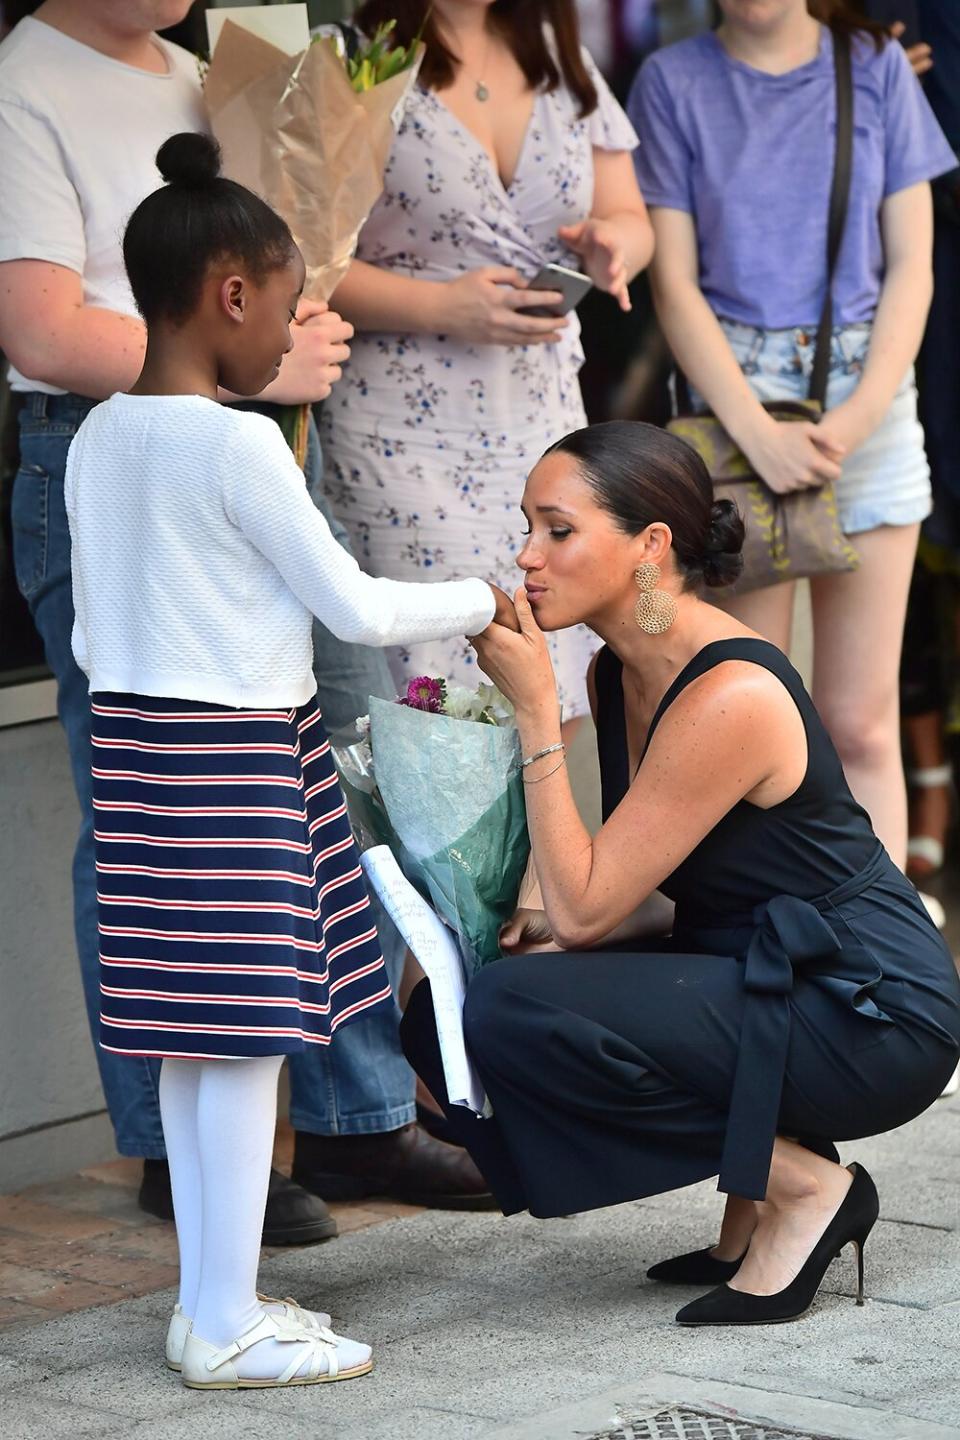 Meghan, Duchess of Sussex visits the African not-for-profit organisation 'mothers2mothers' during the royal tour of South Africa on September 25, 2019 in Cape Town, South Africa. The organisation trains and employs women living with HIV as frontline health workers across eight African nations.